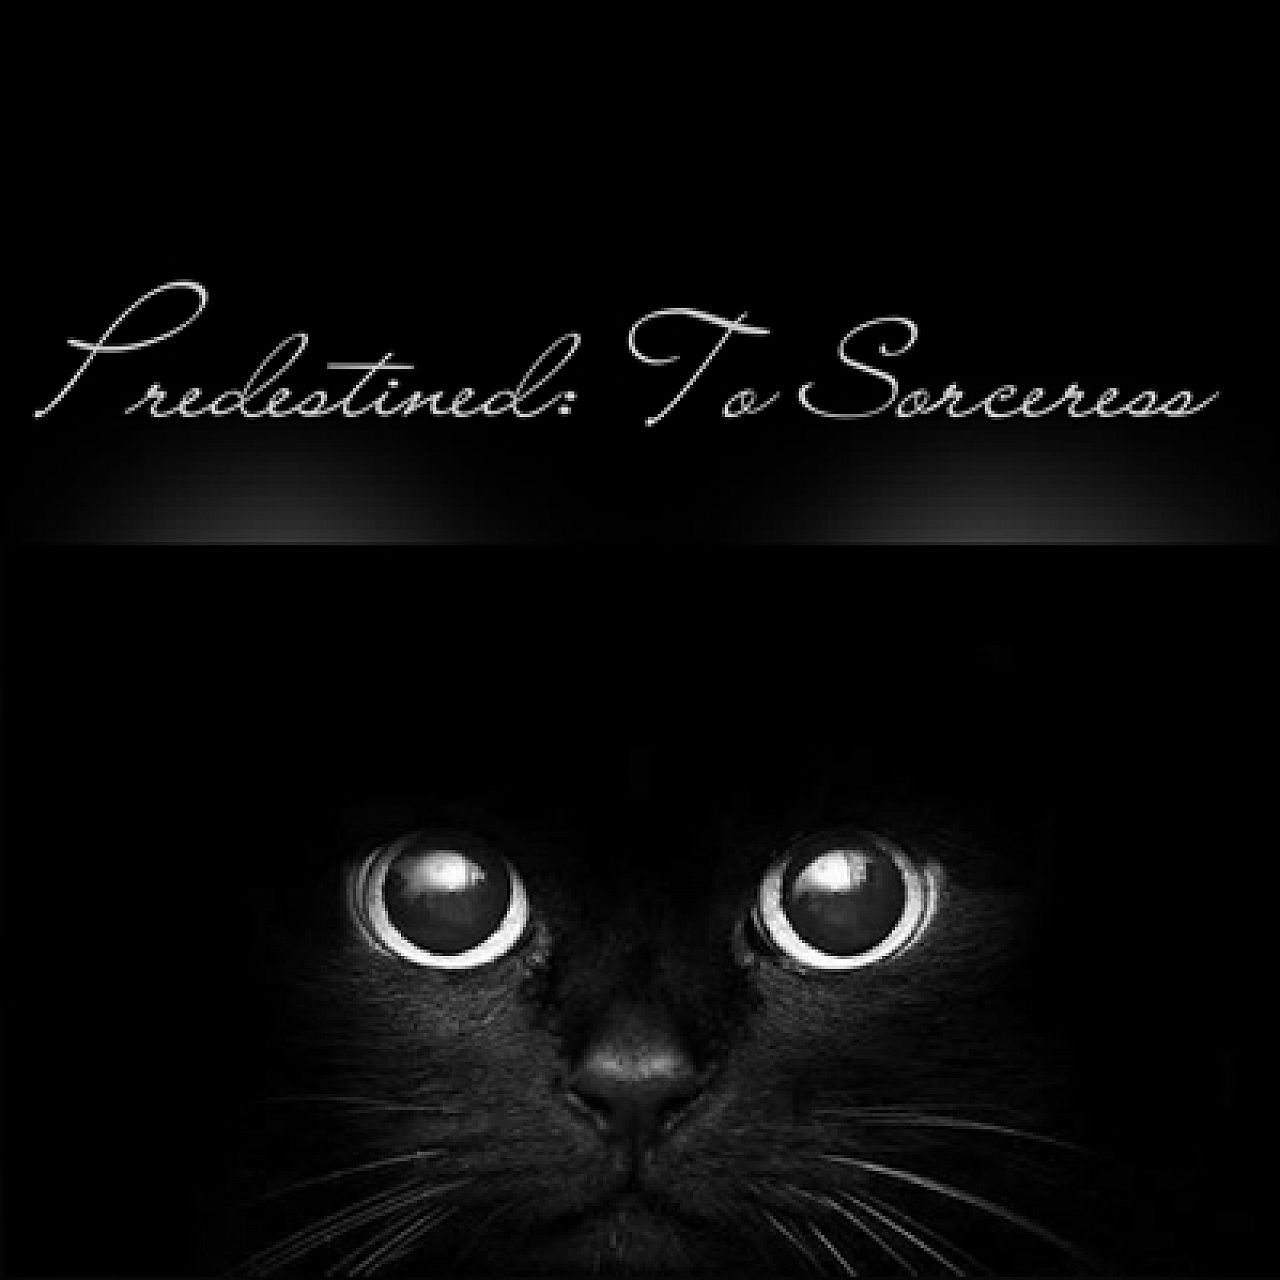 Predestined: To Sorceress